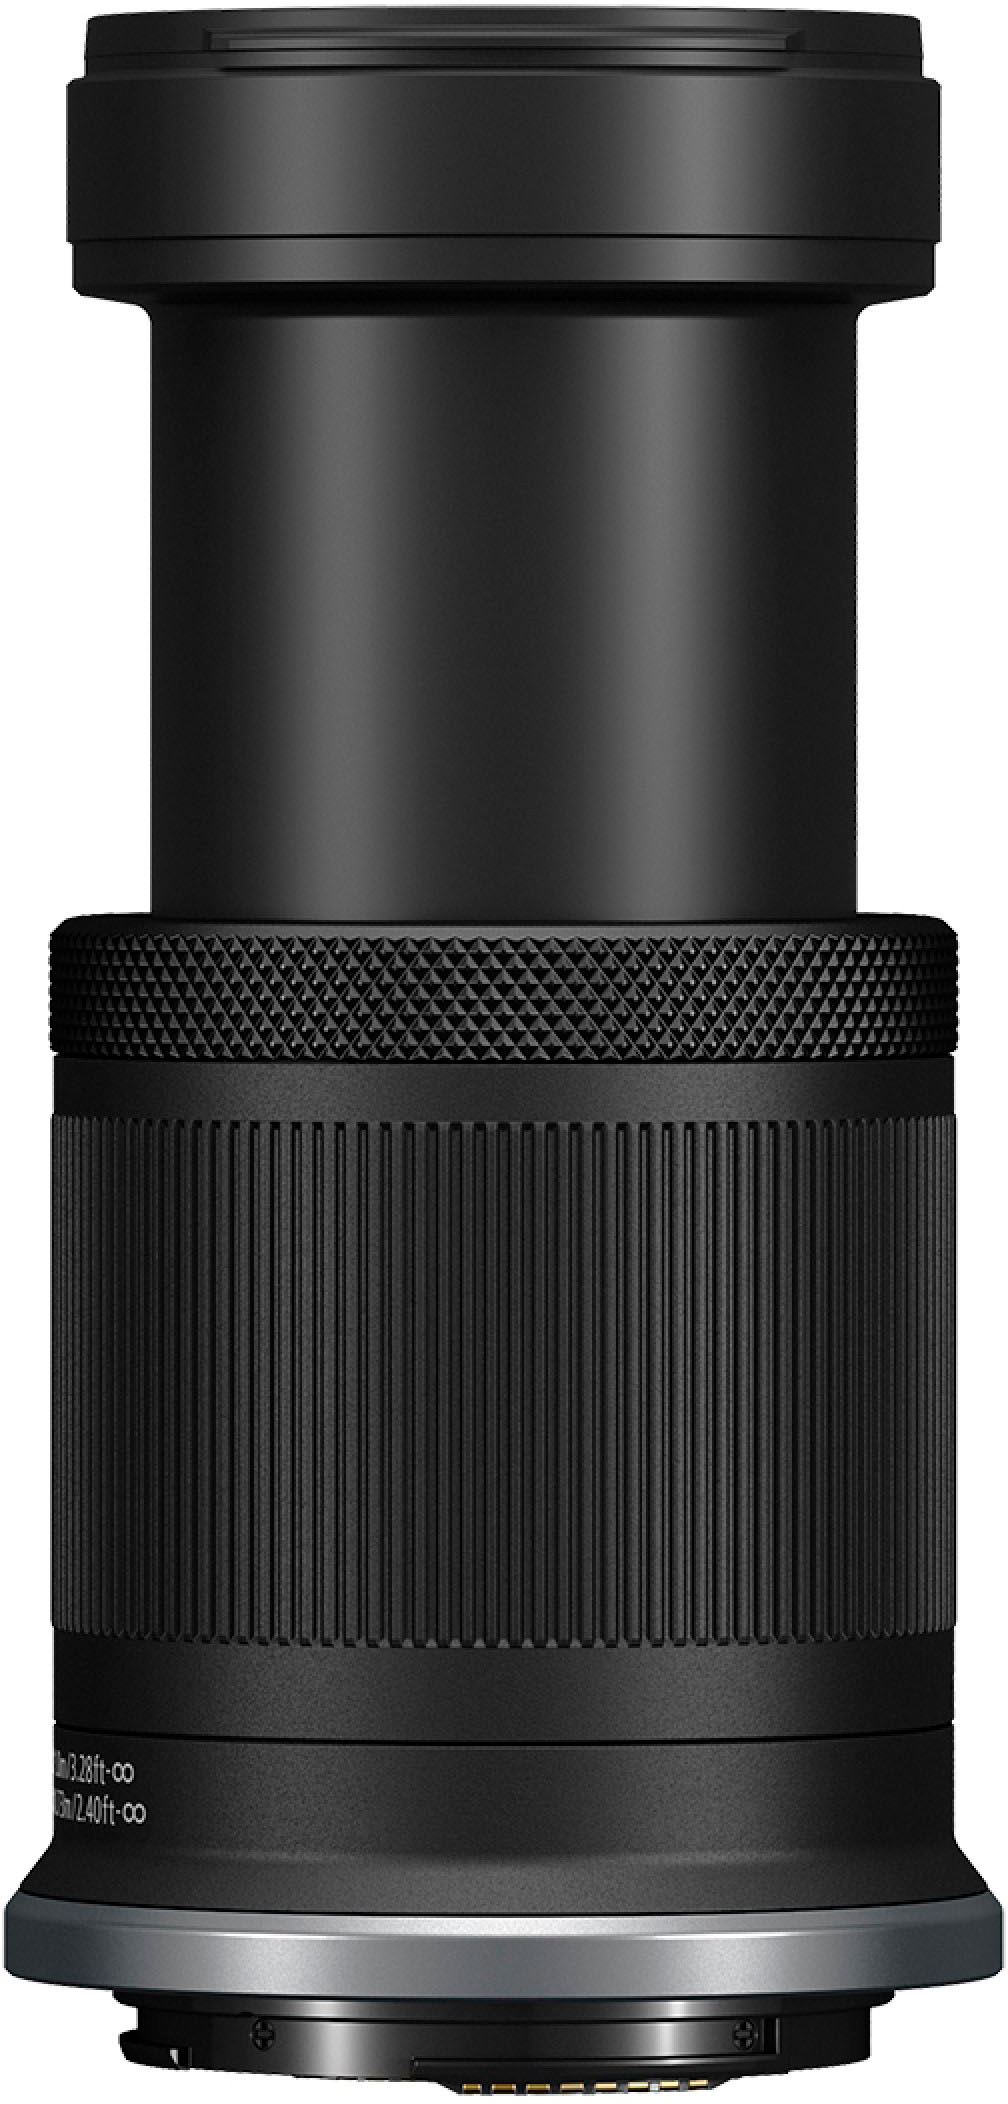 Left View: Sigma - 60-600mm f/4.5-6.3 DG OS HSM Optical Telephoto Zoom Lens for Canon EF - Black